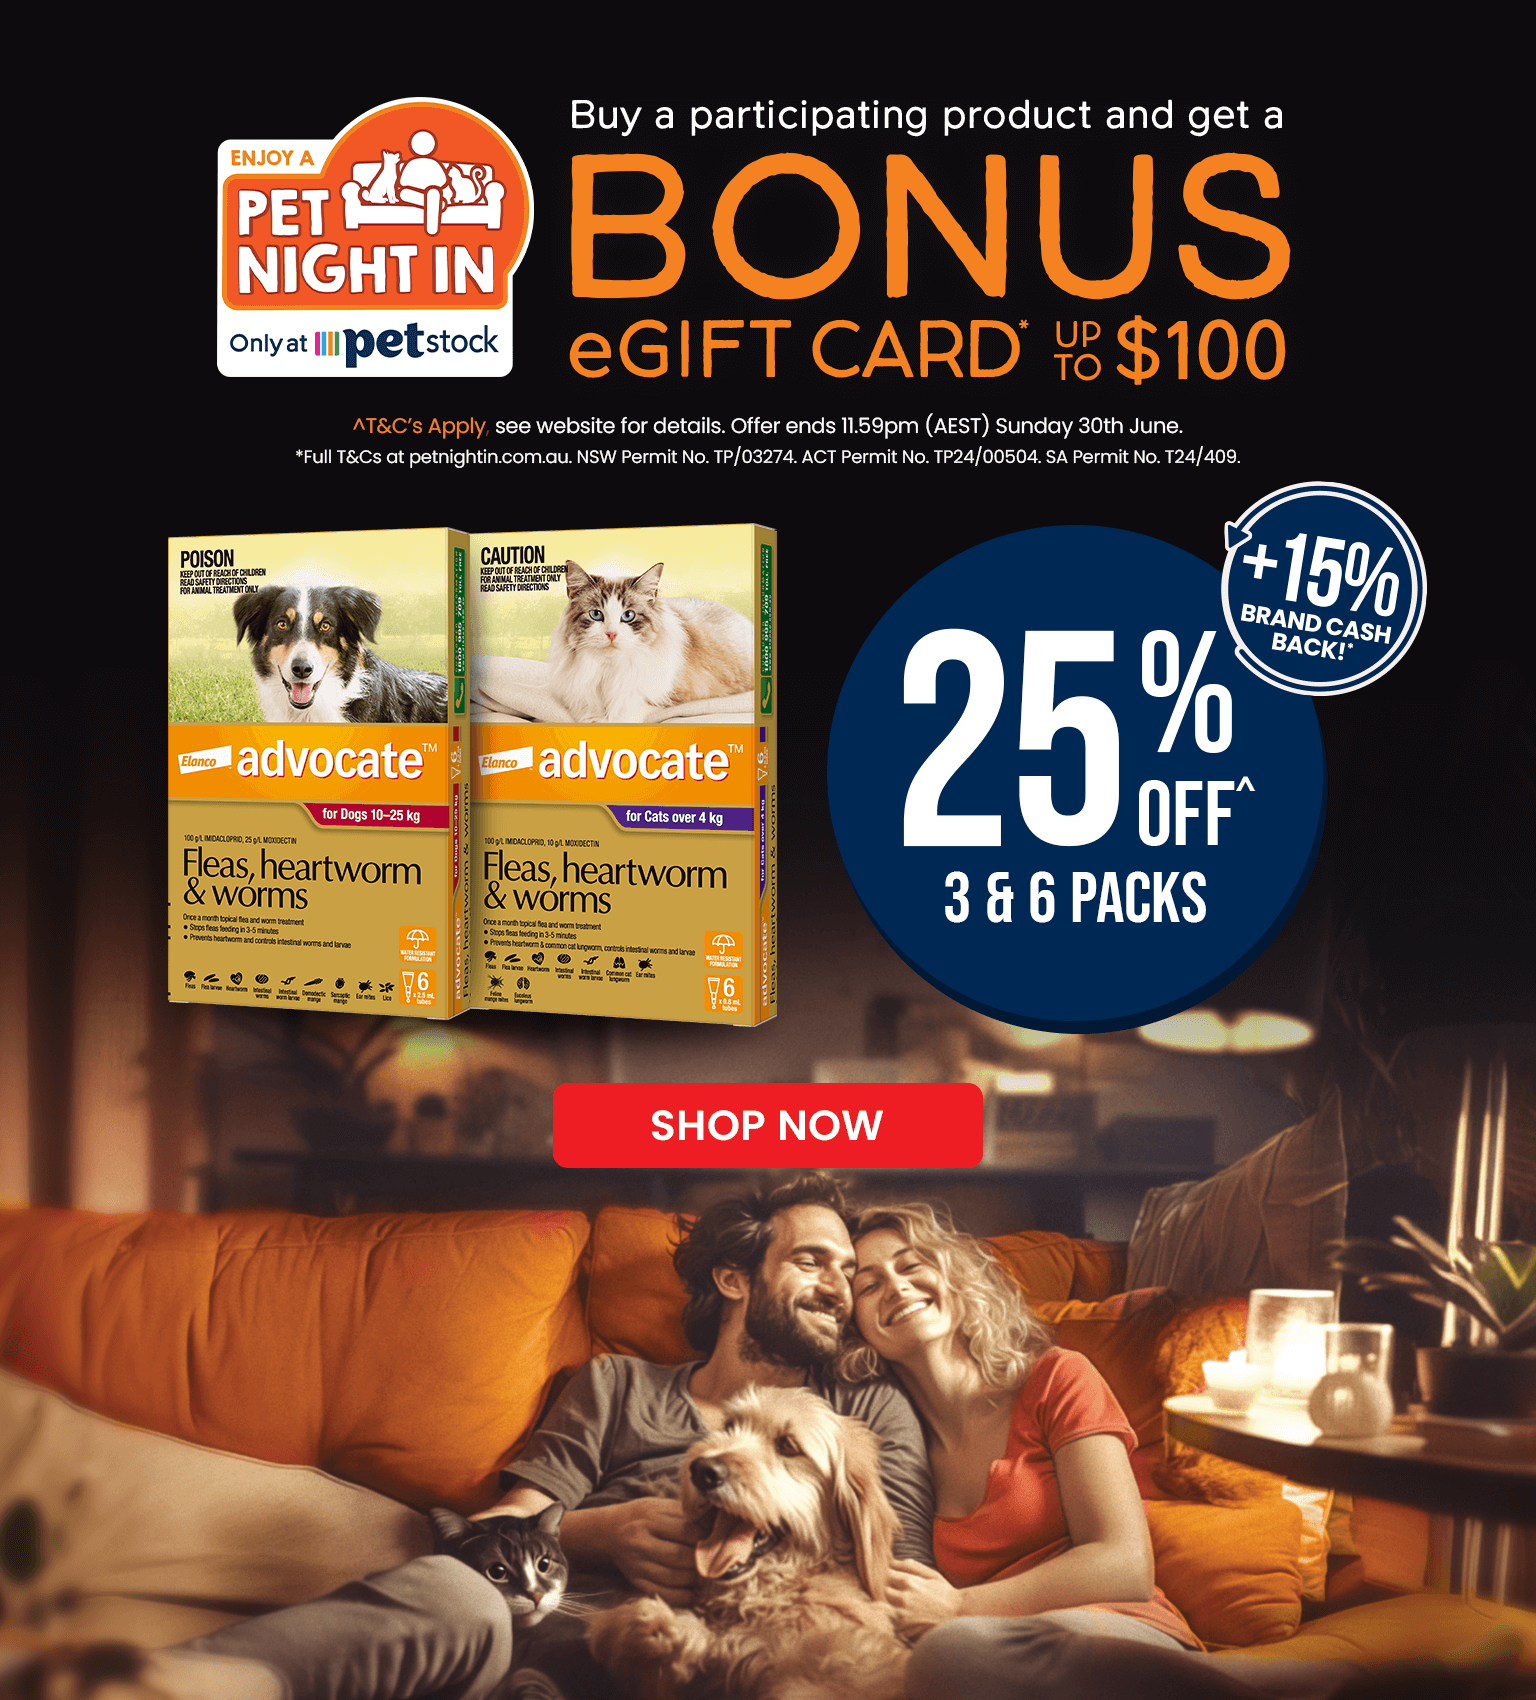 Enjoy a Pet Night In with Advocate and keep your pet safe from Fleas, Heartworm & Worms